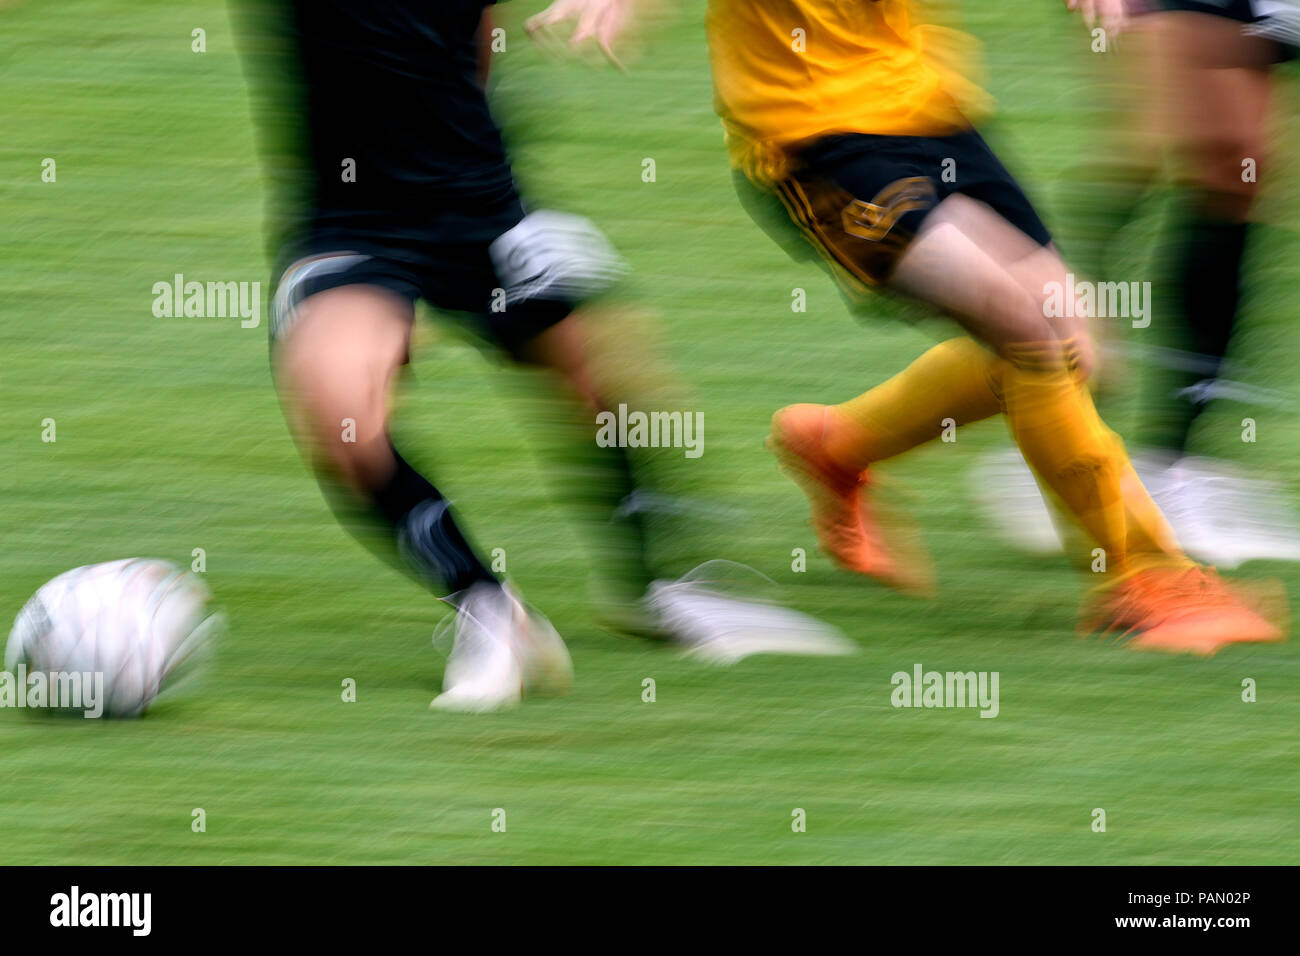 Soccer feature, legs and ball Stock Photo